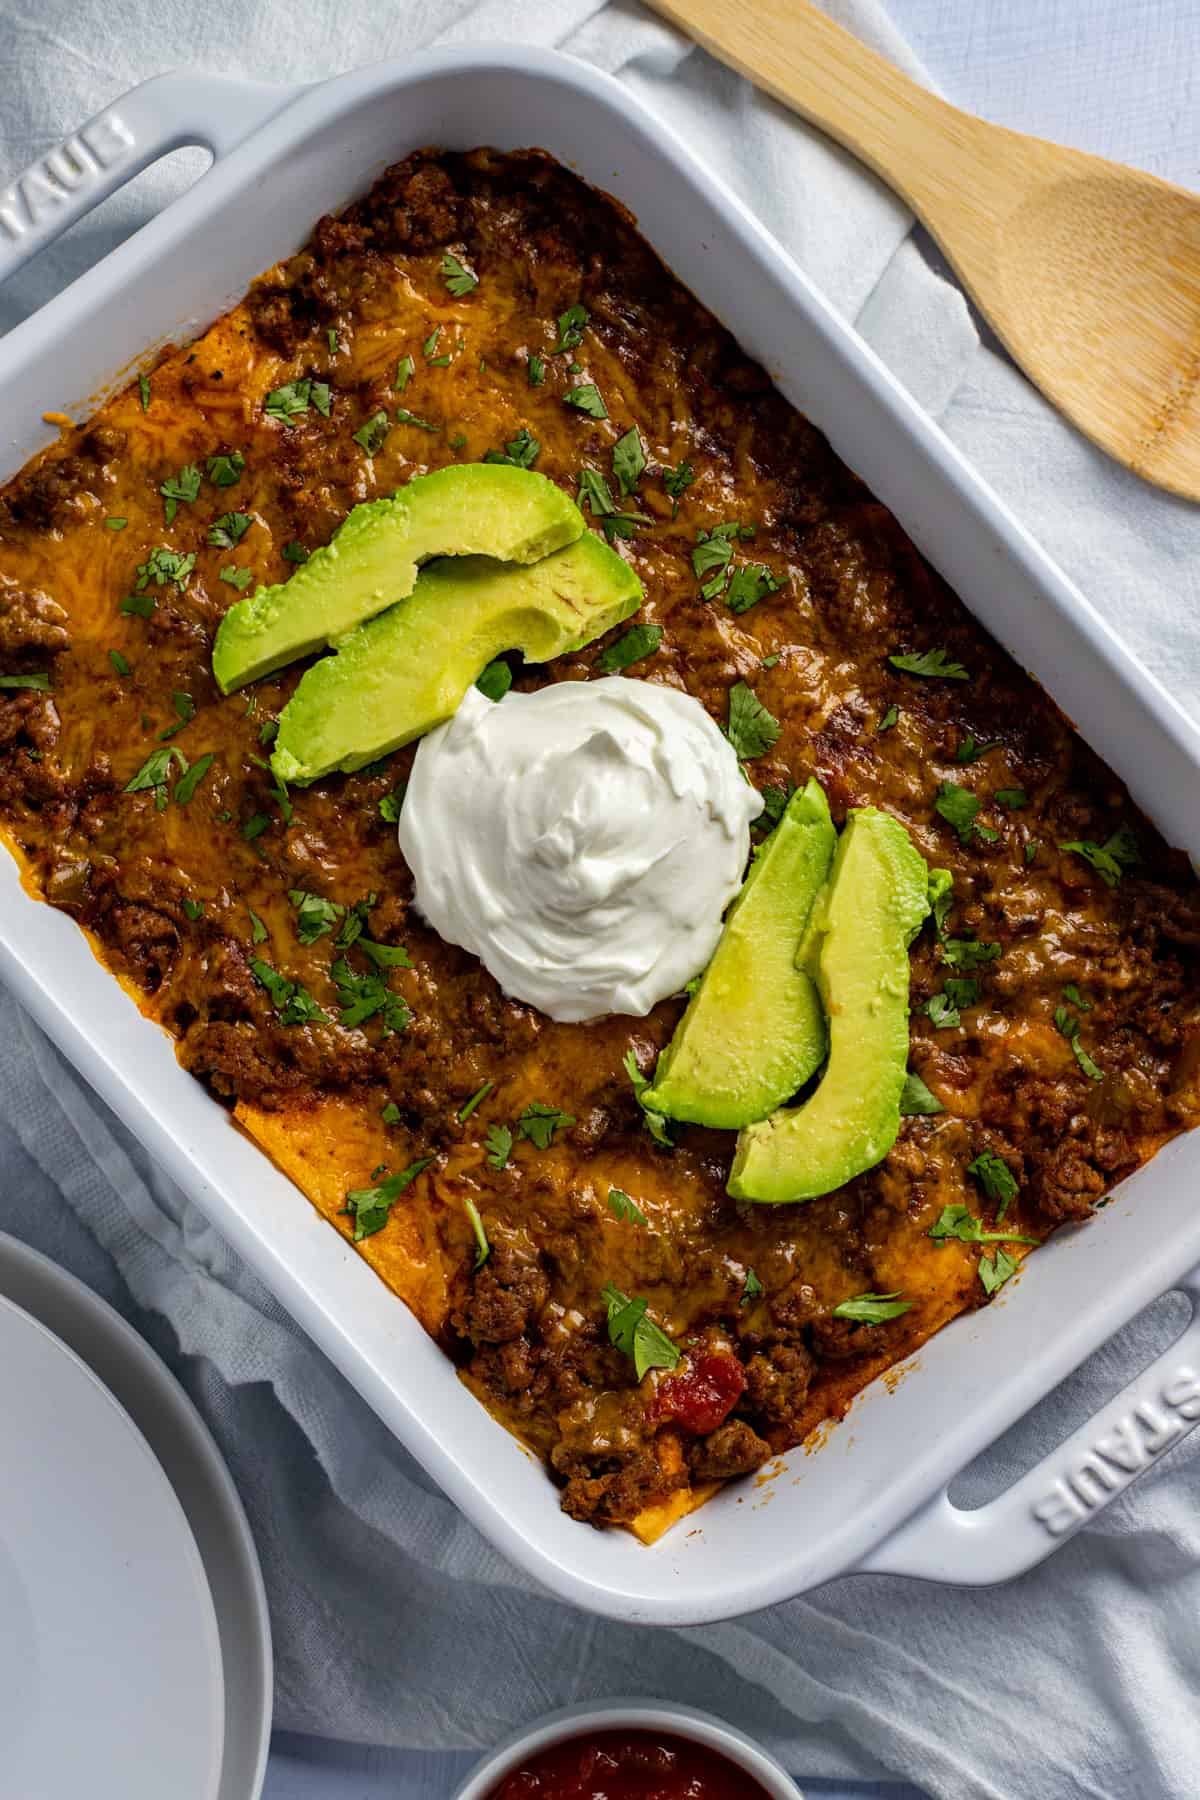 baked casserole in white rectangular dish.  Topped with sliced avocados and dollop of sour cream.  Wooden spoon on the side.